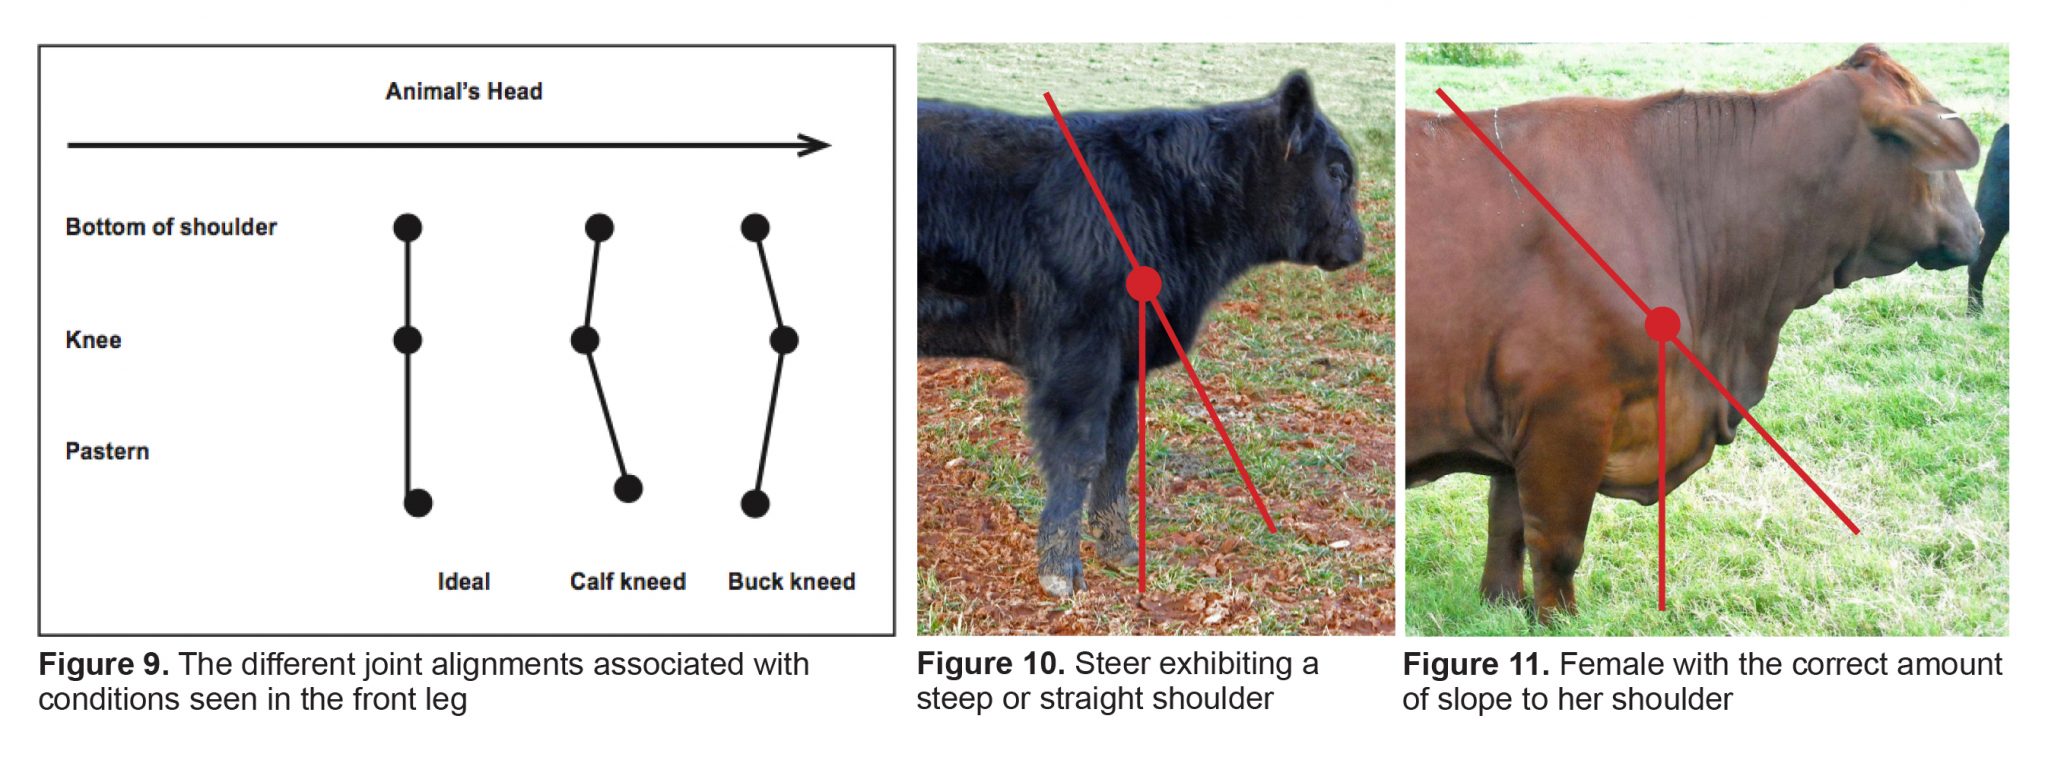 Figure 9. The different joint alignments associated with conditions seen in the front leg. Figure 10. Steer exhibiting a steep or straight shoulder. Figure 11. Female with the correct amount of slope to her shoulder.